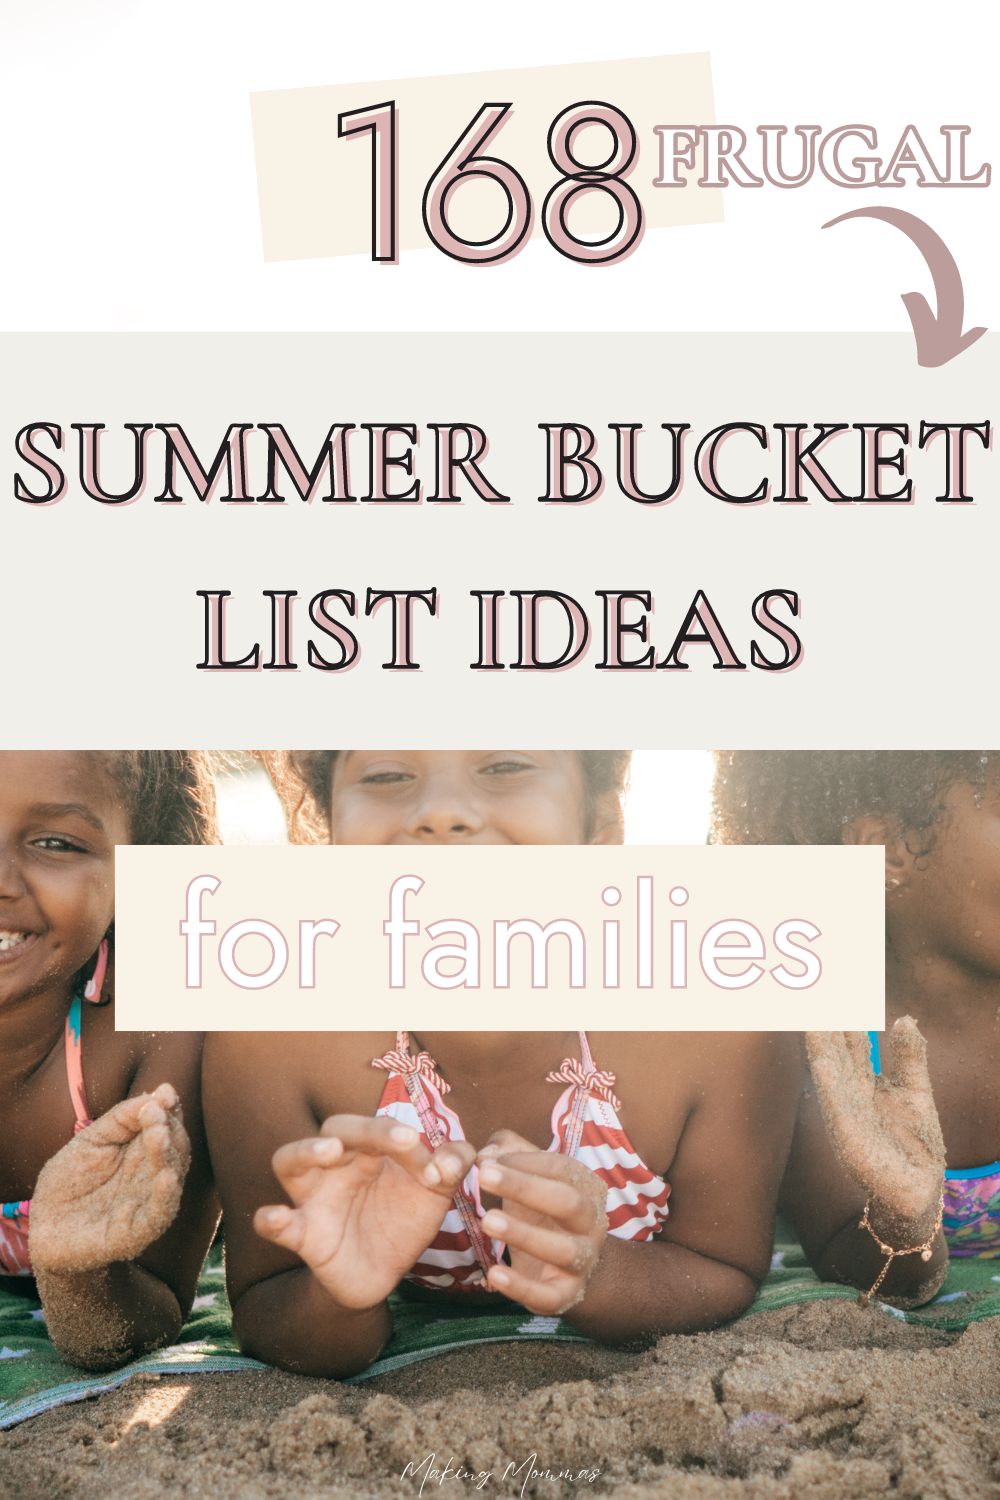 Pin image that reads, "168 frugal summer bucket list ideas for families", with an image of three children laying on a towel in the sand